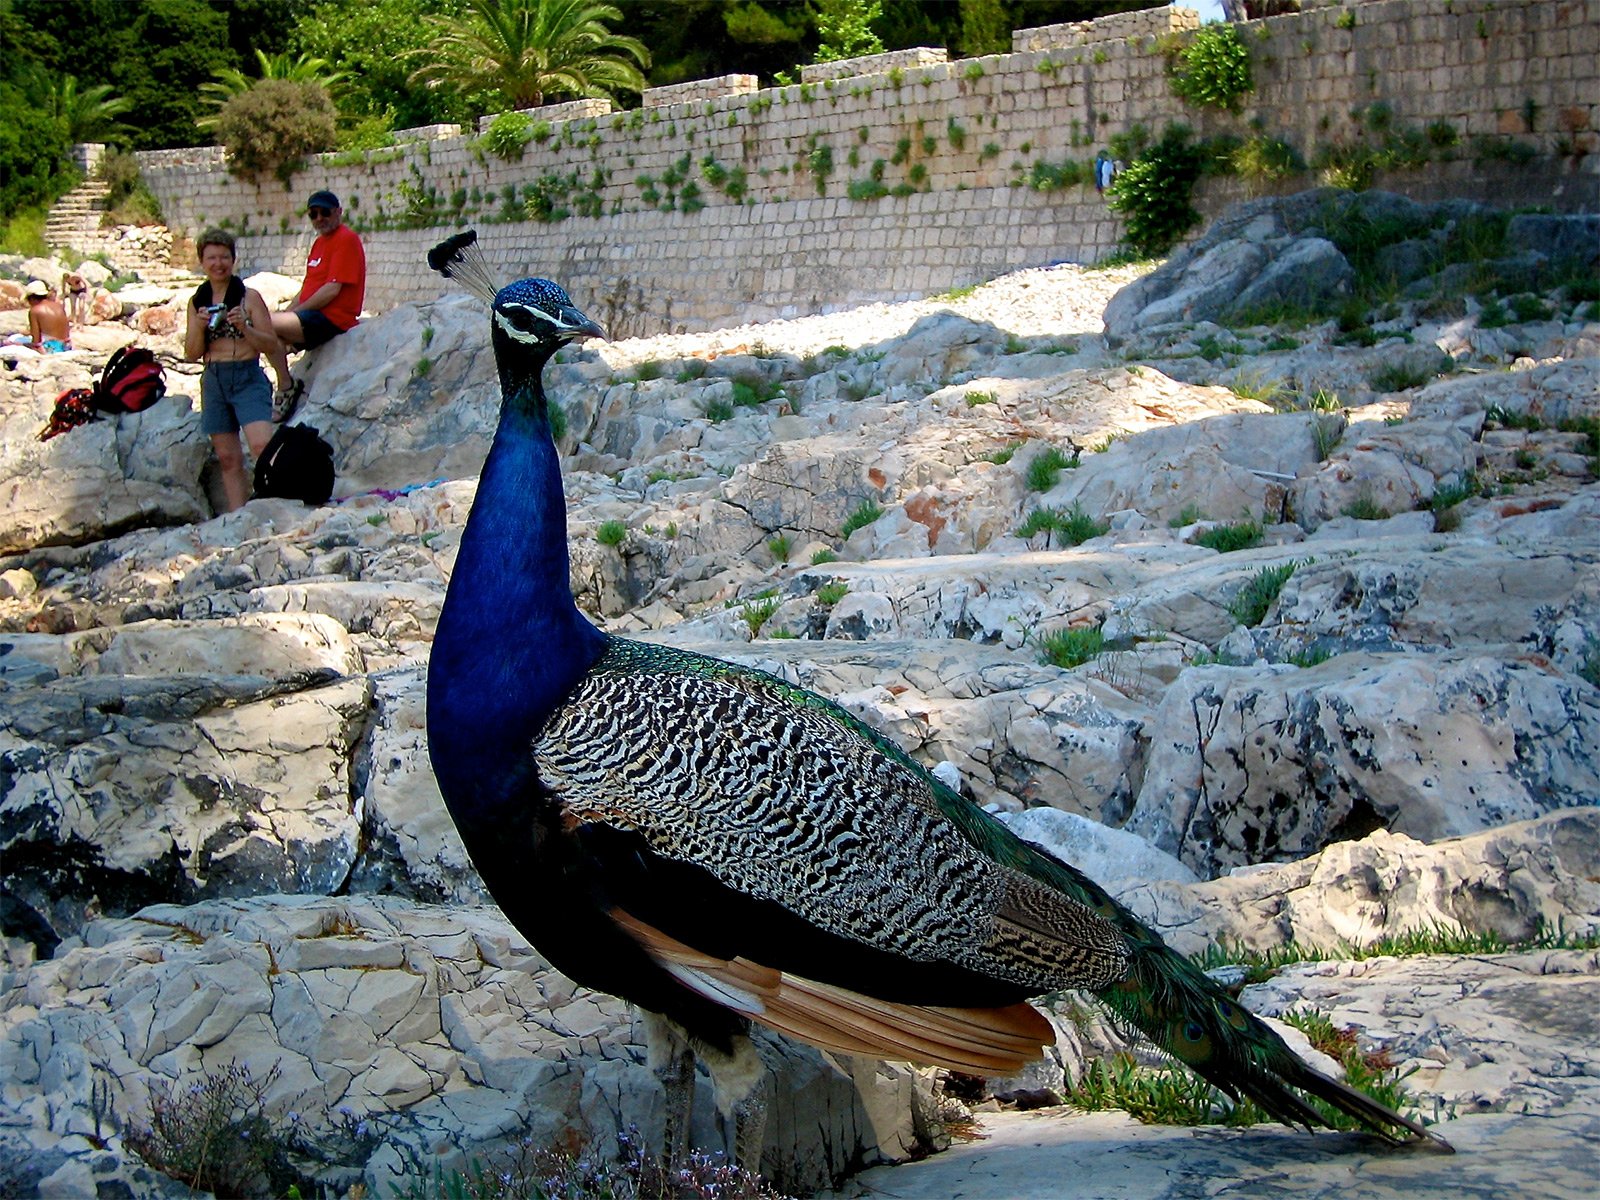 How to feed peacocks near the Dead Sea lake in Dubrovnik